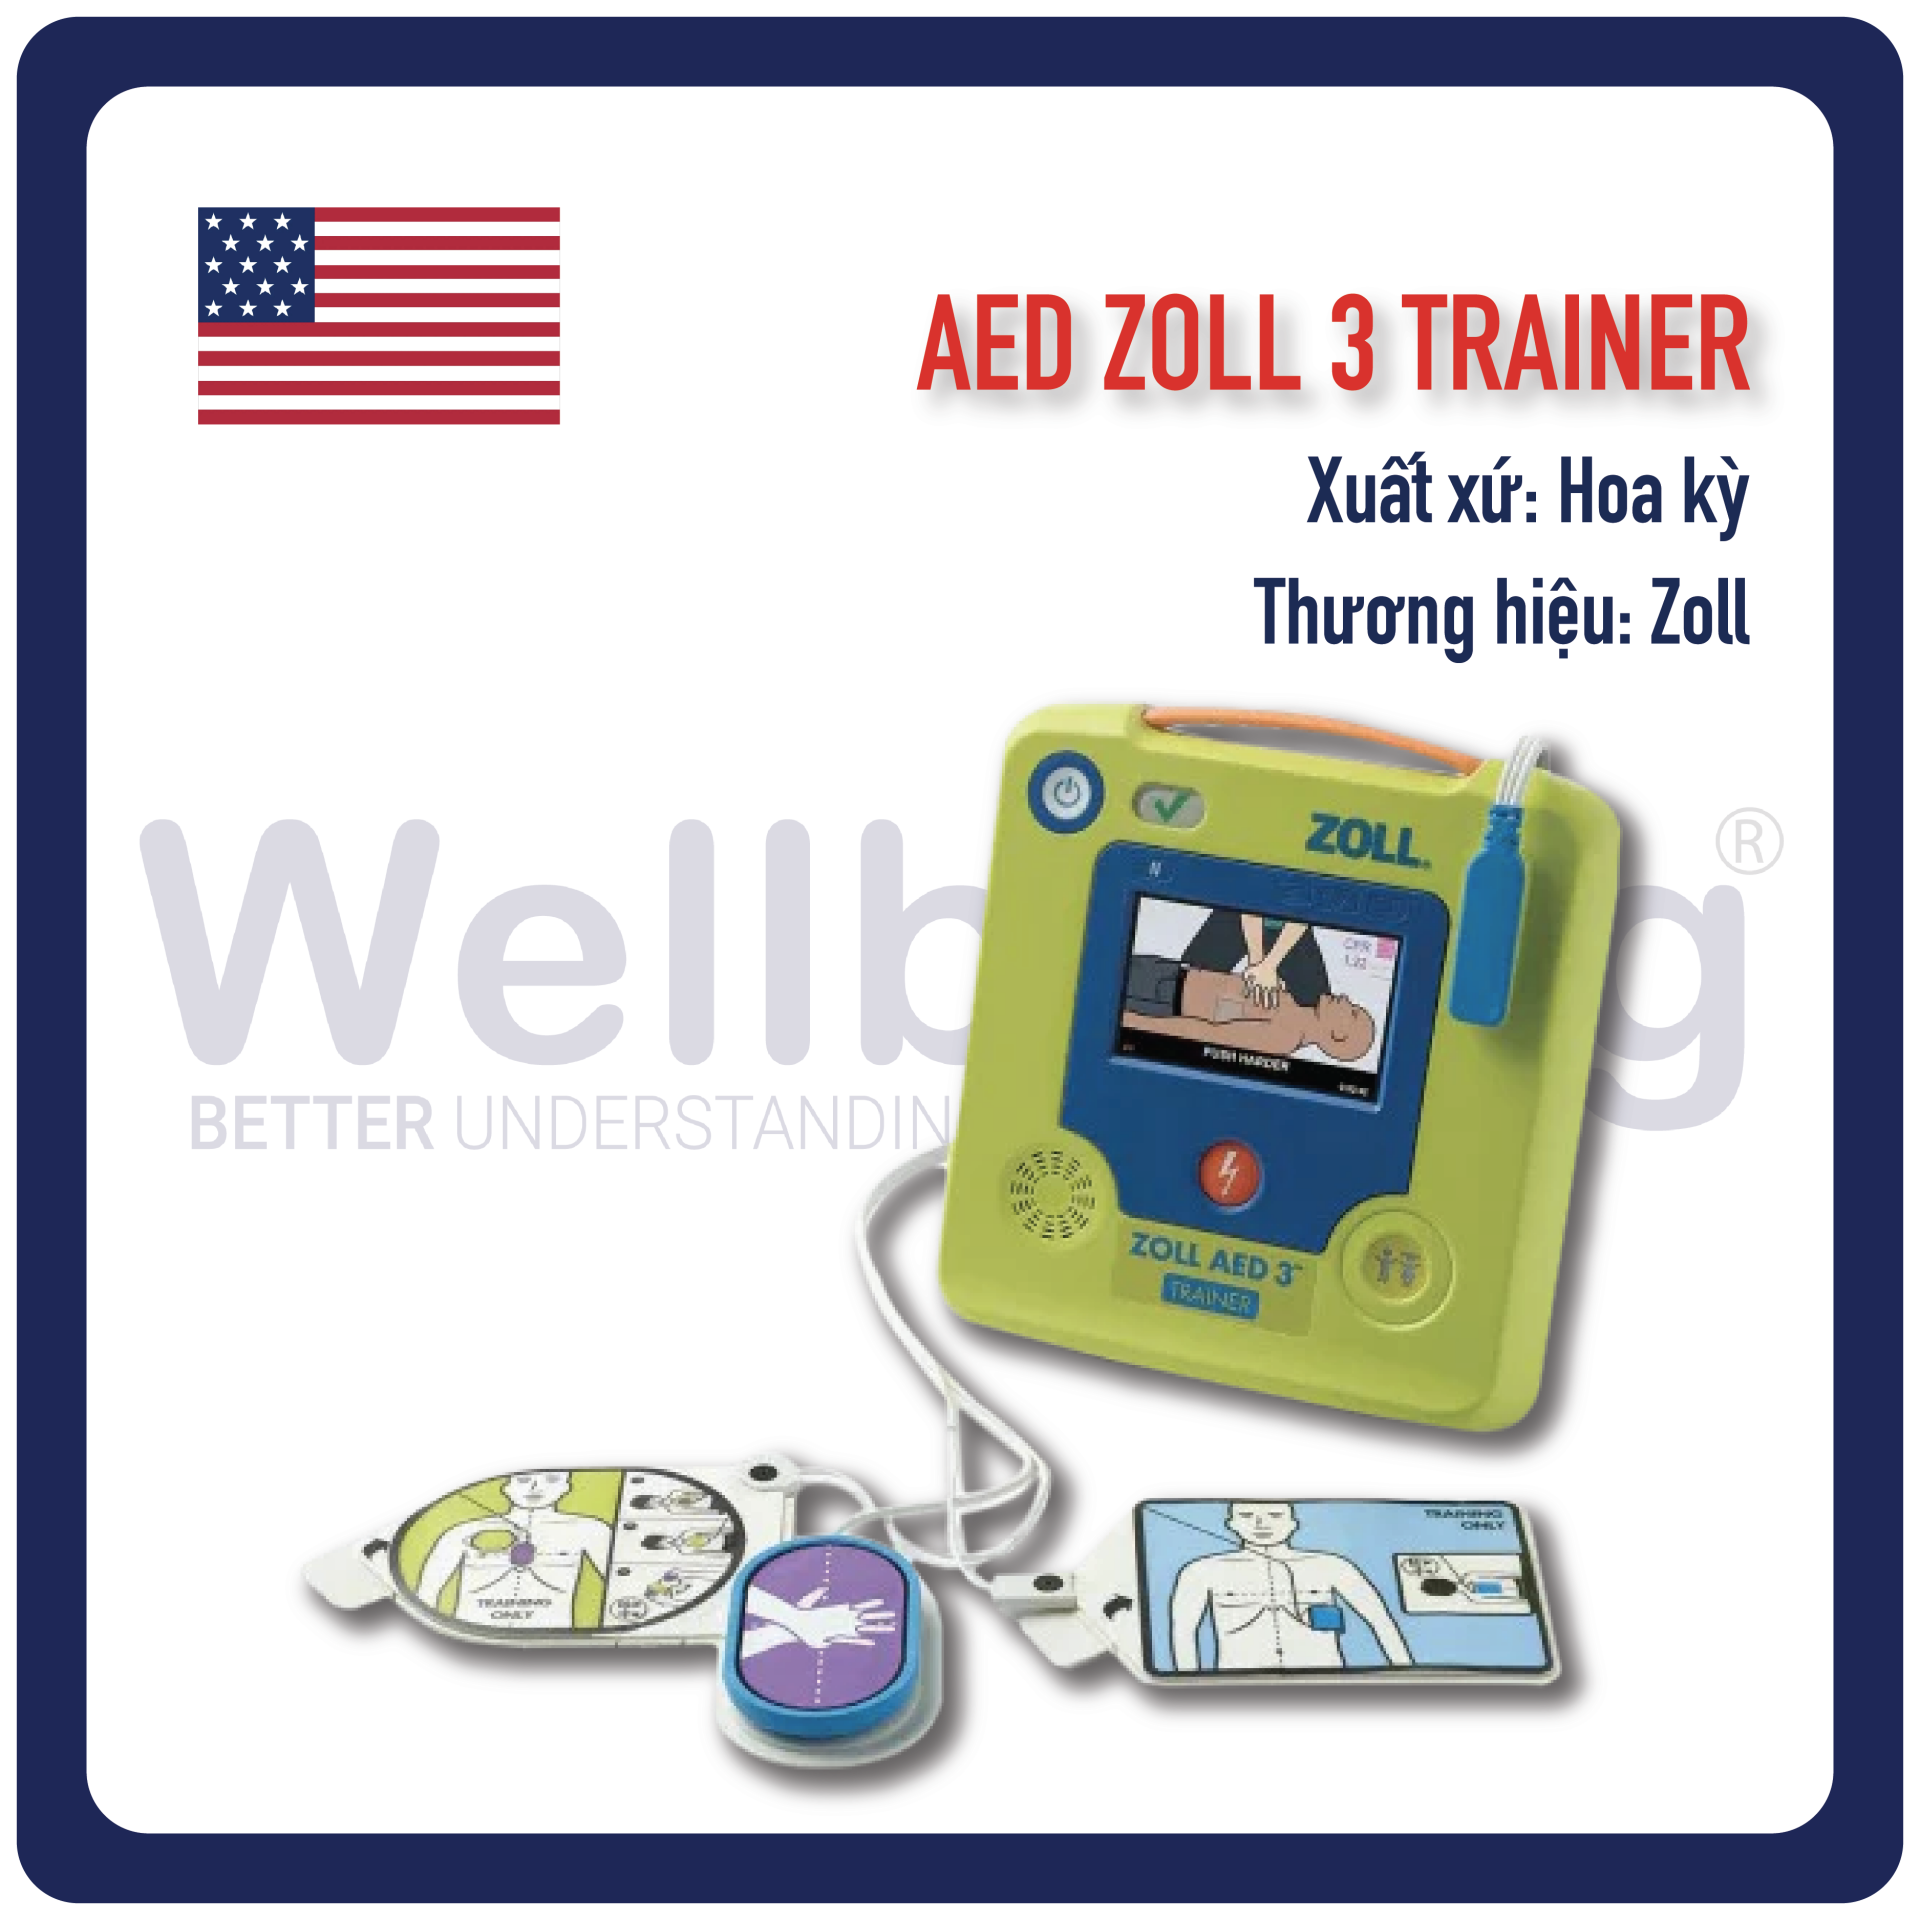 Máy AED Trainer Zoll 3